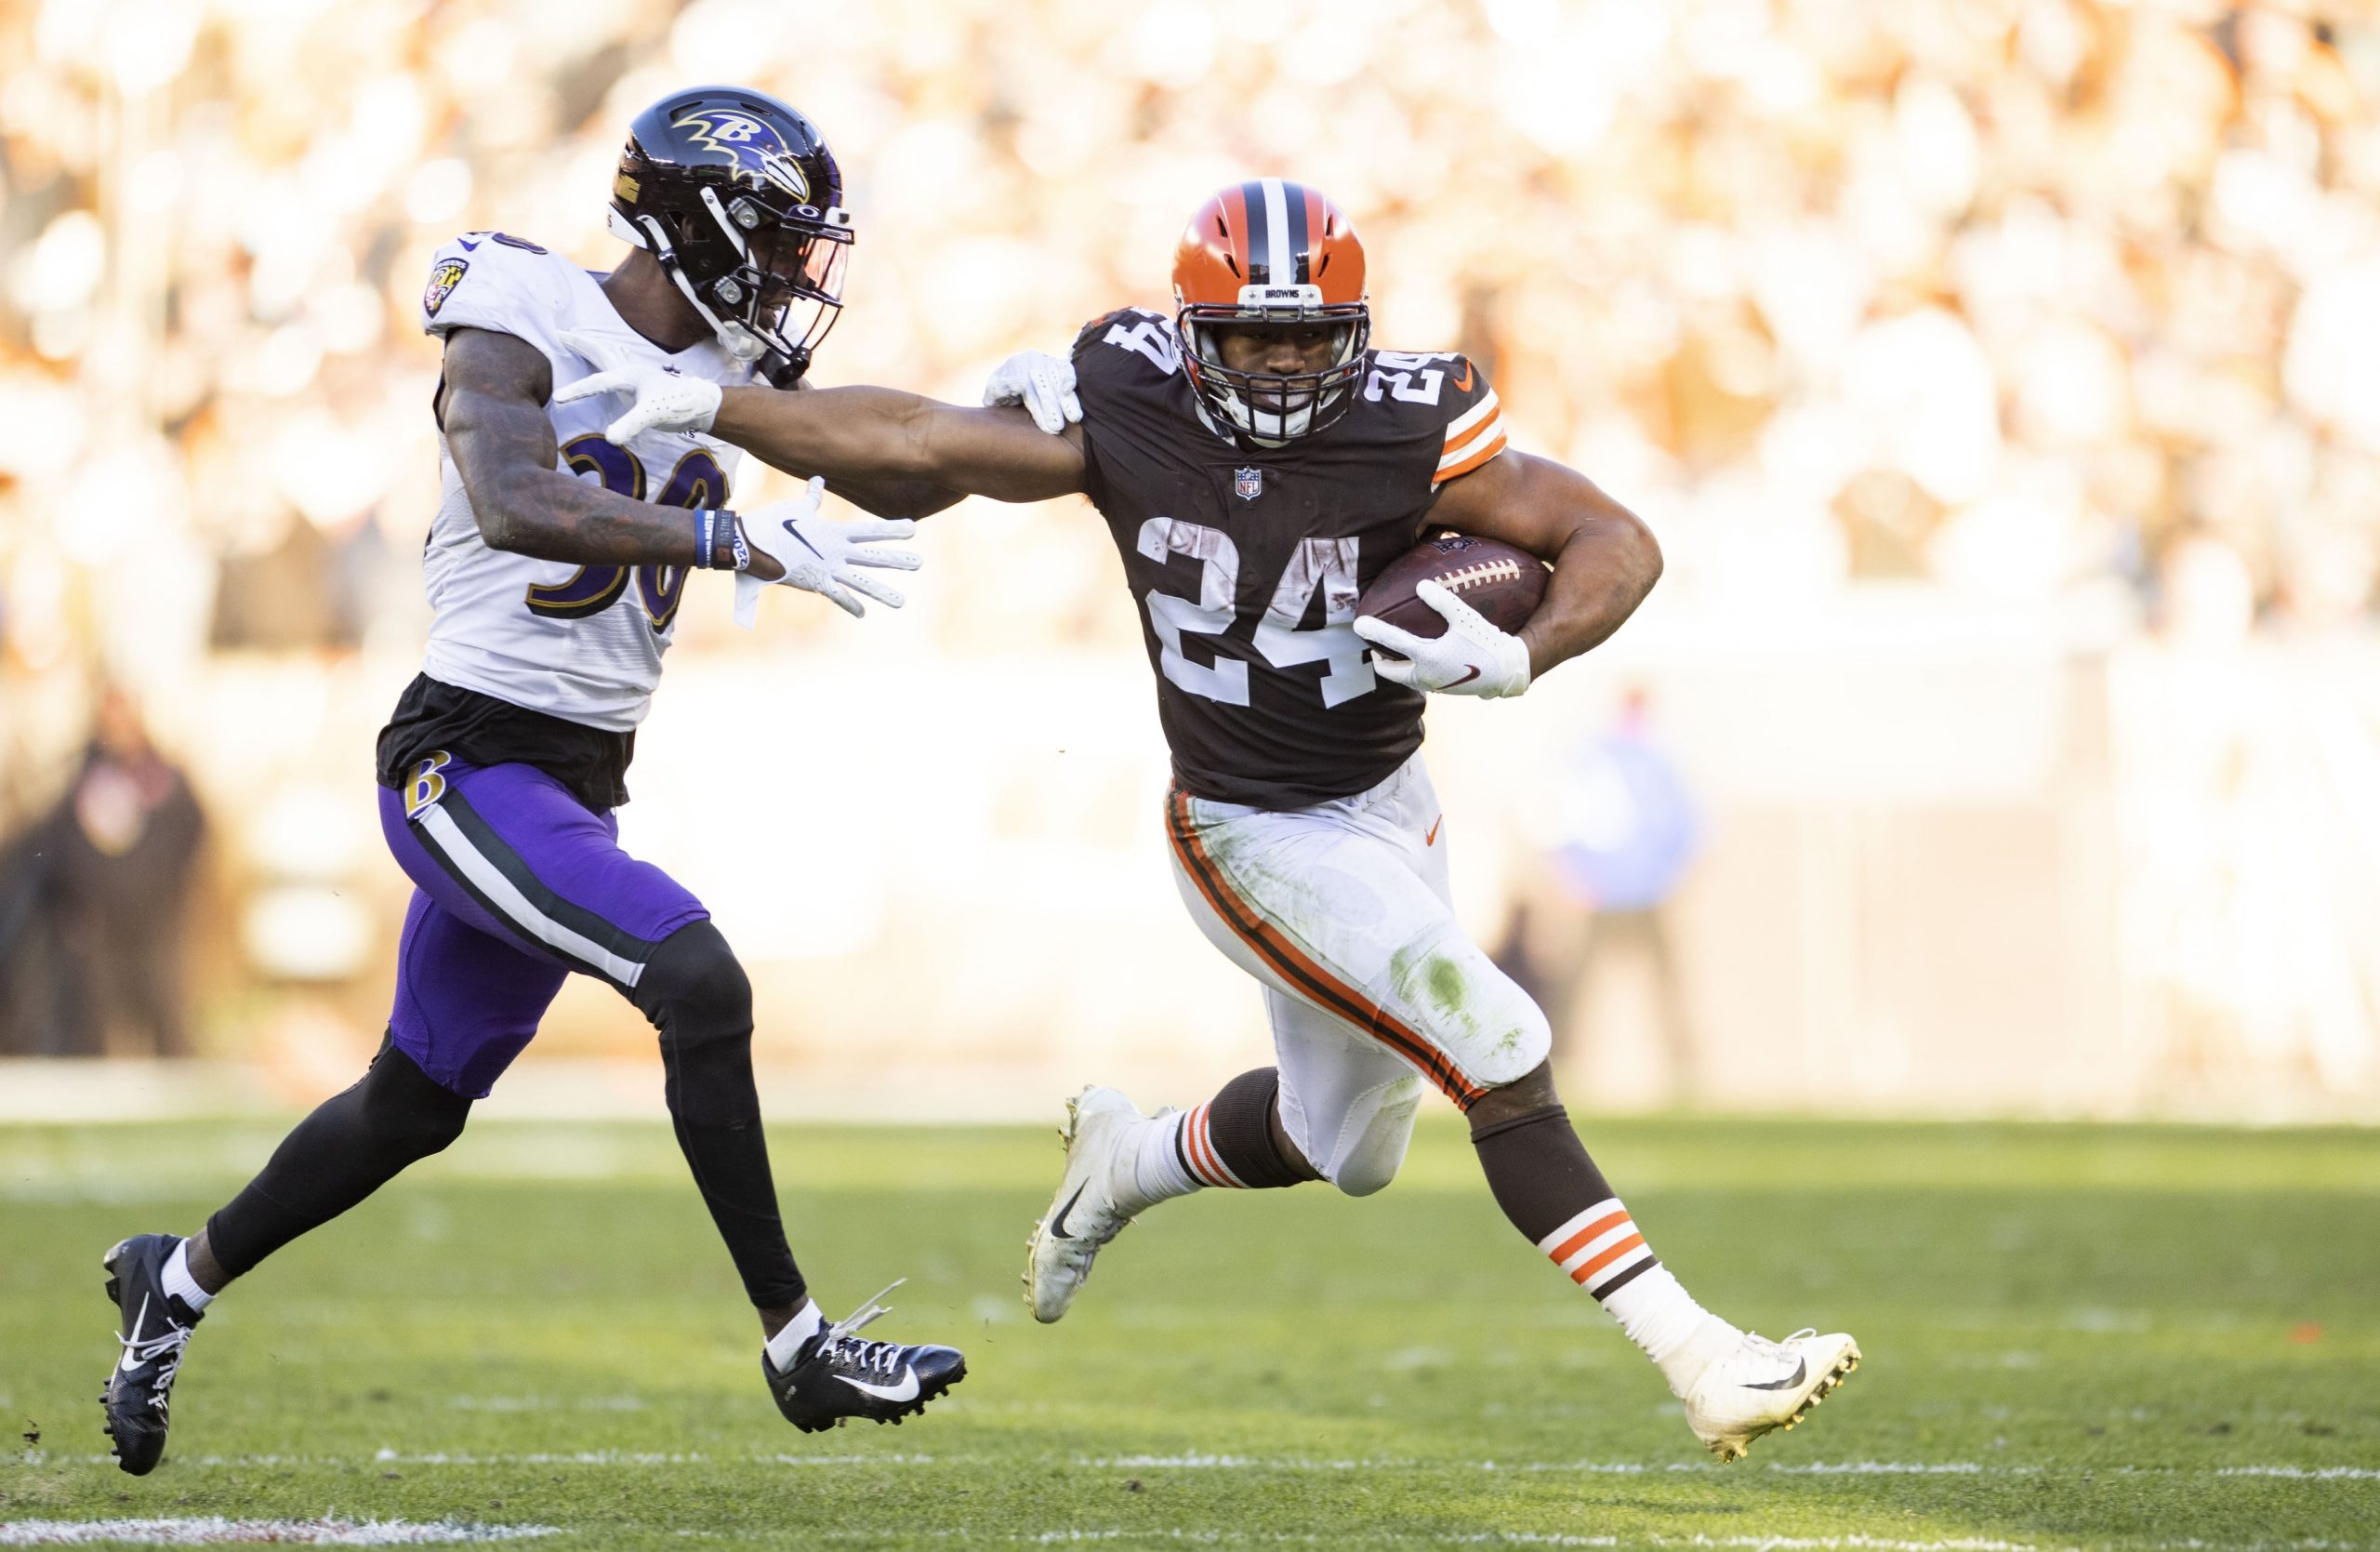 Cleveland Browns running back Nick Chubb (24) pushes off against Baltimore Ravens cornerback Chris Westry (30) during the fourth quarter at FirstEnergy Stadium.